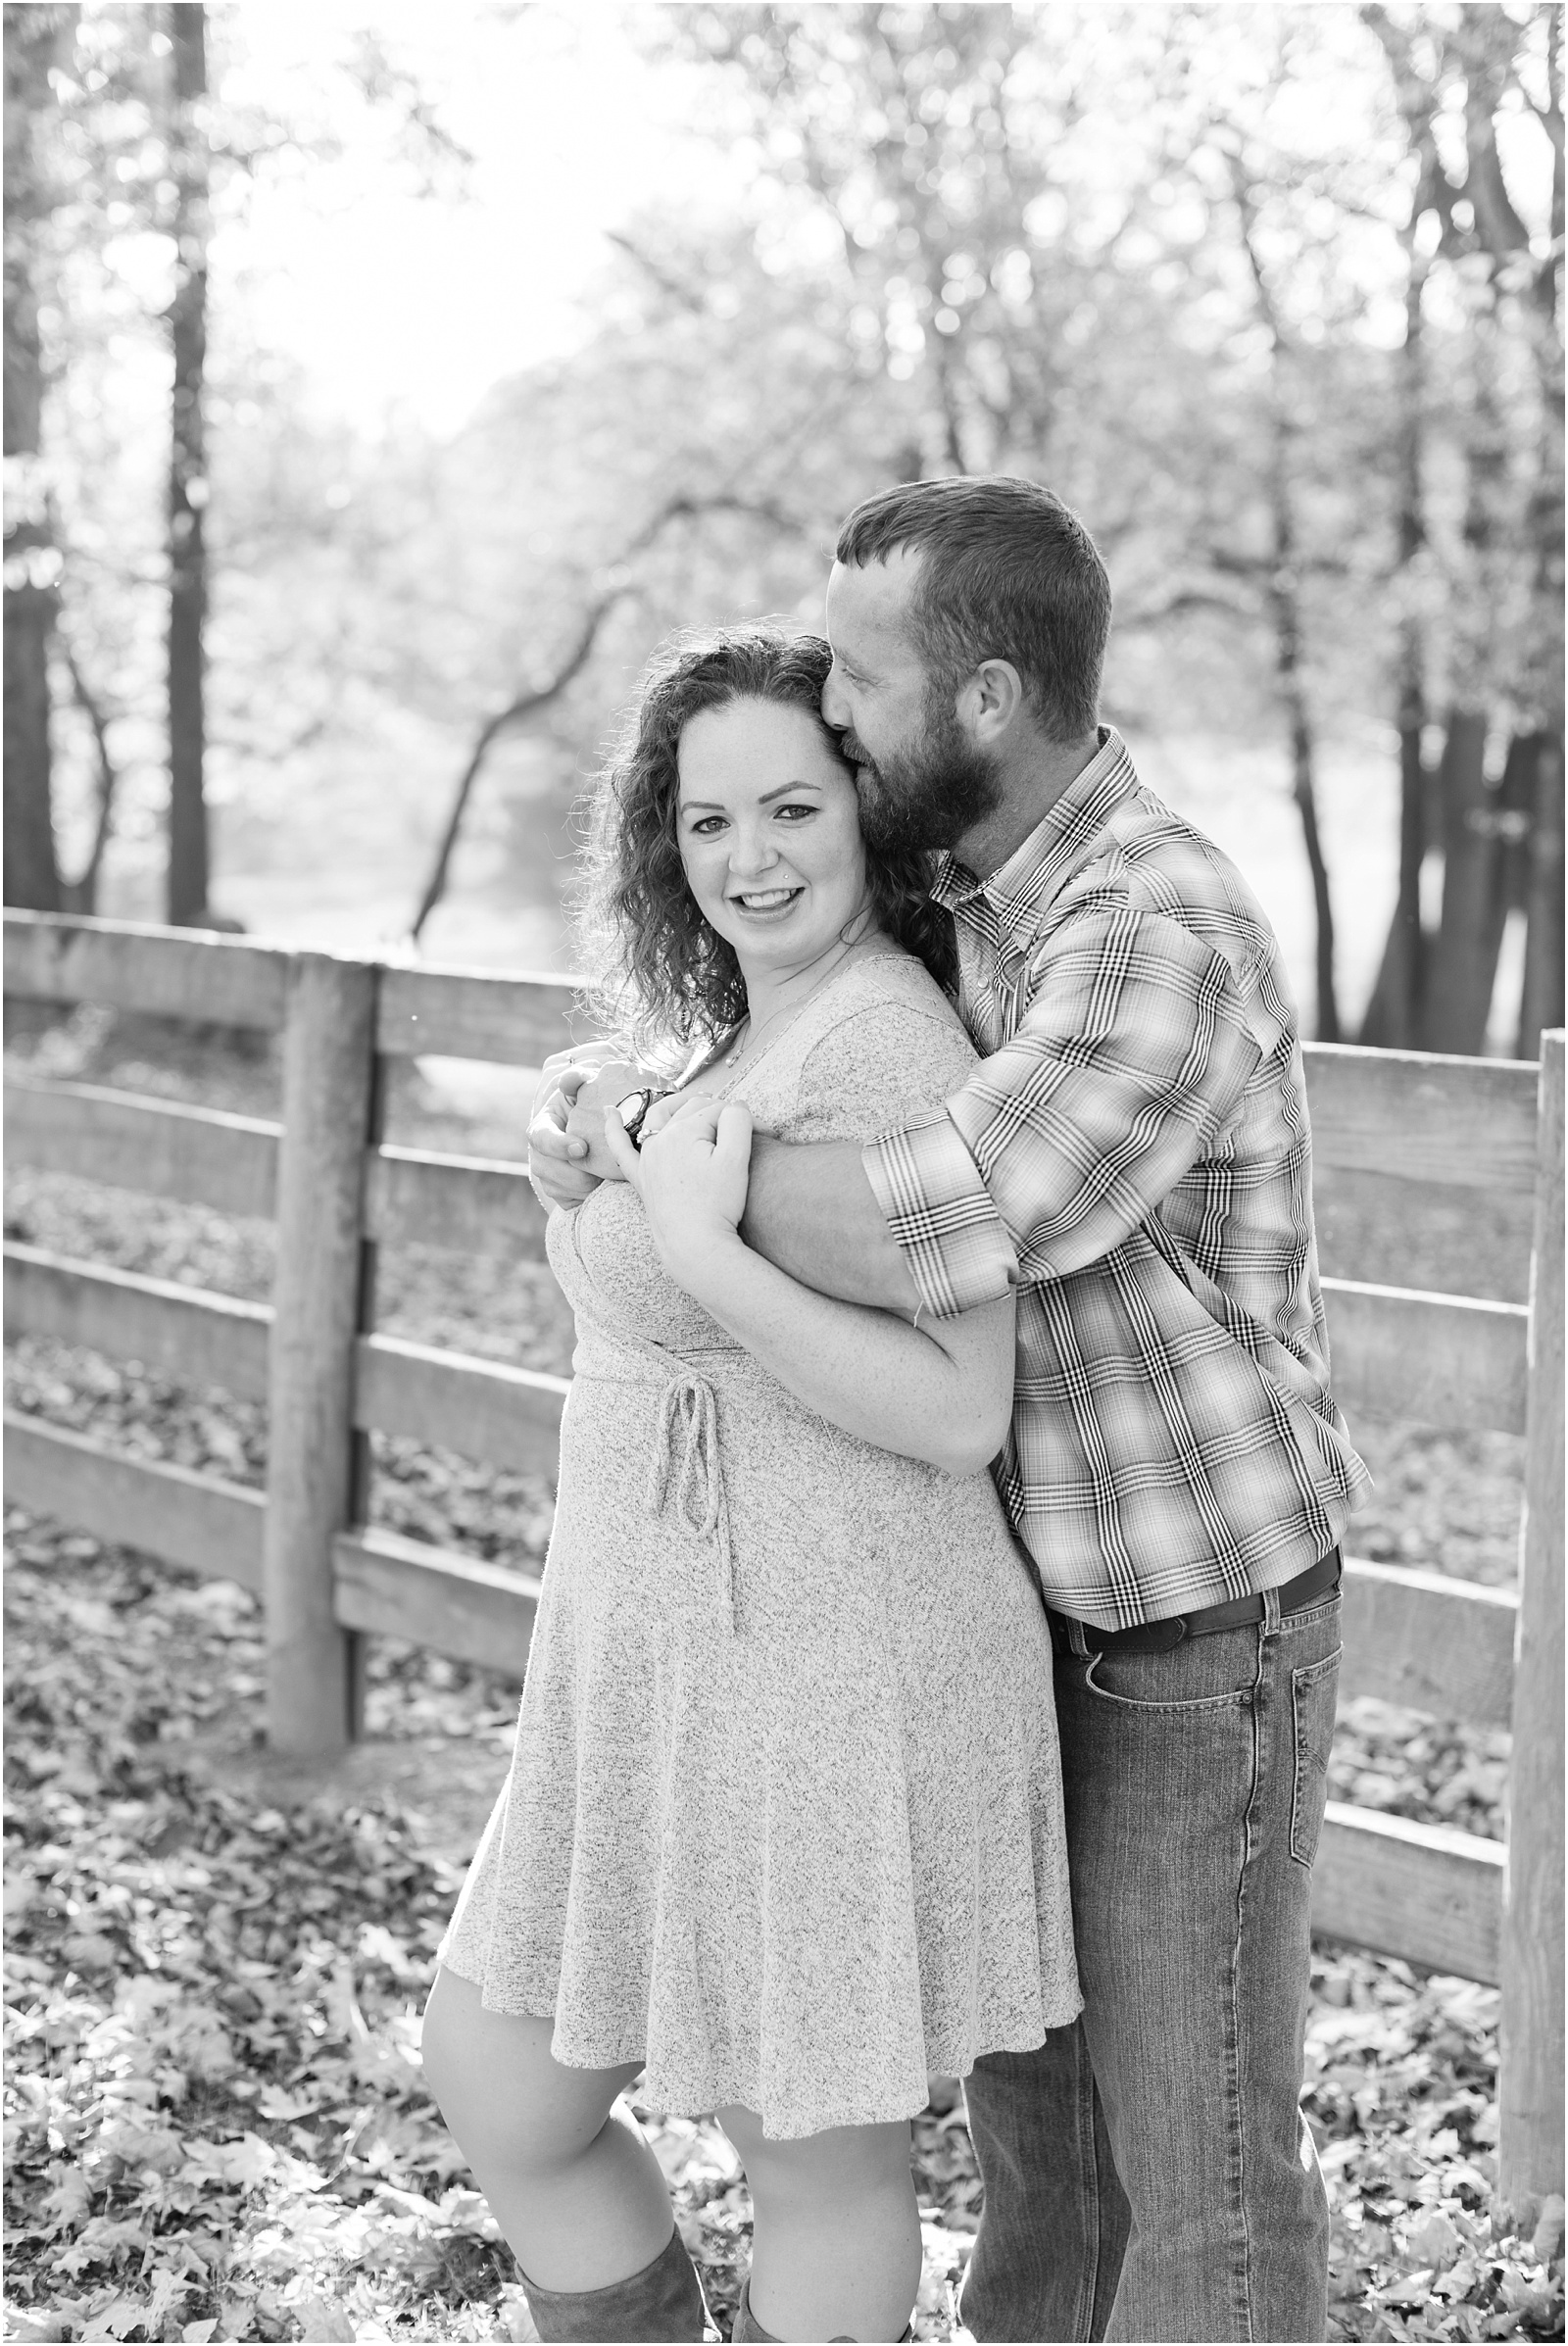 Michelle and Sara Photography, Michelle and Sara Couples, Michelle and Sara Brides, Engagement Session, Cedarock Park, Cedarock Park Engagement, Burlington NC, Burlington Engagement Session, Romantic Engagement Session, Fall Engagement Session